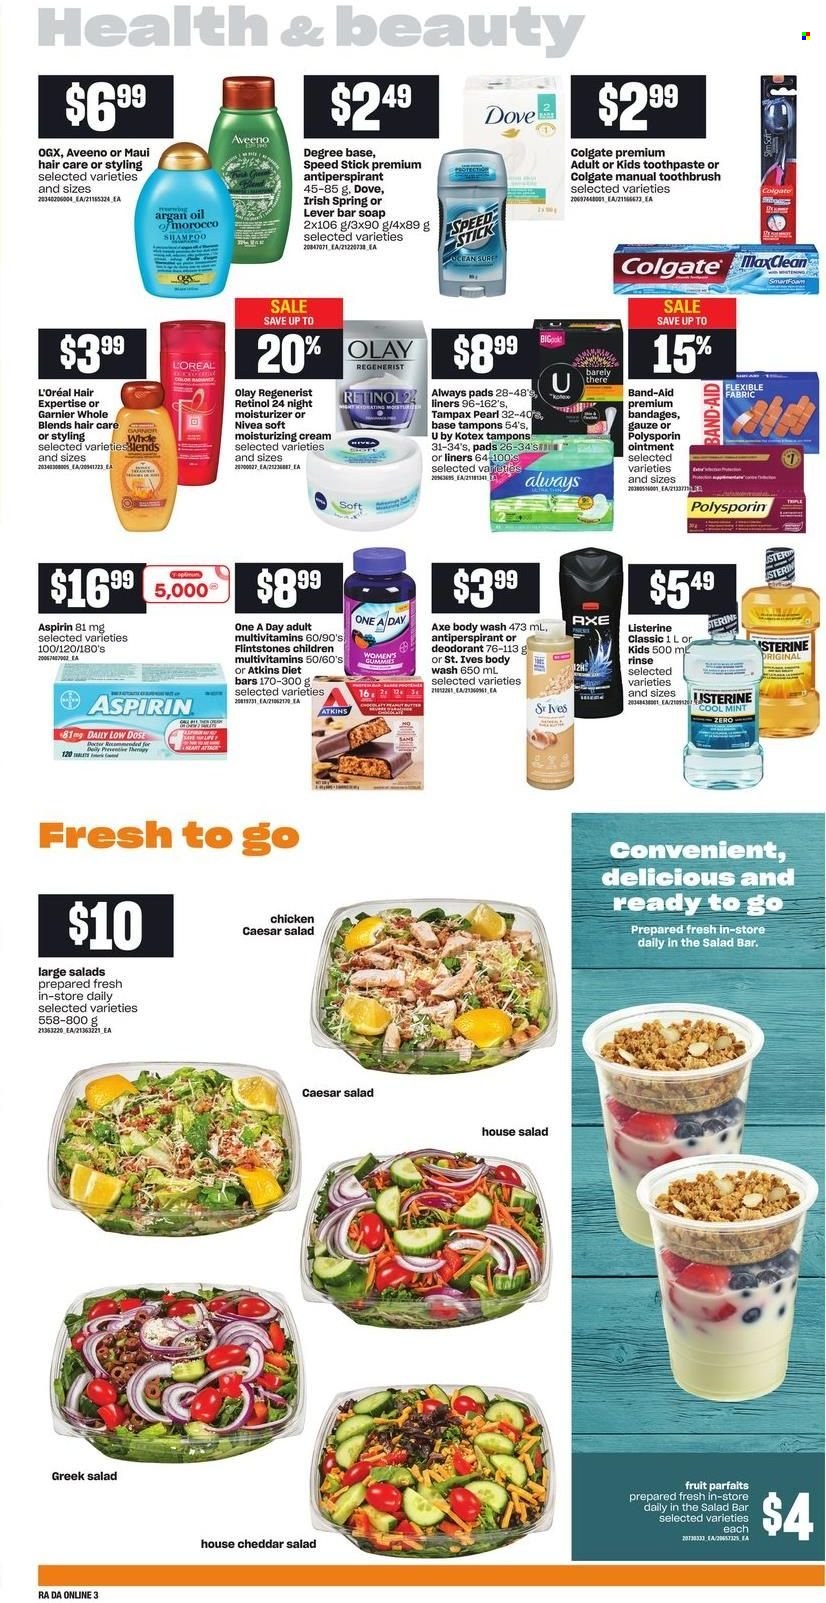 thumbnail - Atlantic Superstore Flyer - December 30, 2021 - January 05, 2022 - Sales products - salad, cheddar, cheese, oil, Aveeno, ointment, body wash, soap bar, soap, toothbrush, toothpaste, Always pads, Kotex, tampons, L’Oréal, moisturizer, Olay, OGX, anti-perspirant, Speed Stick, multivitamin, Low Dose, aspirin, band-aid, Dove, Colgate, Garnier, Listerine, Tampax, Nivea, deodorant. Page 7.